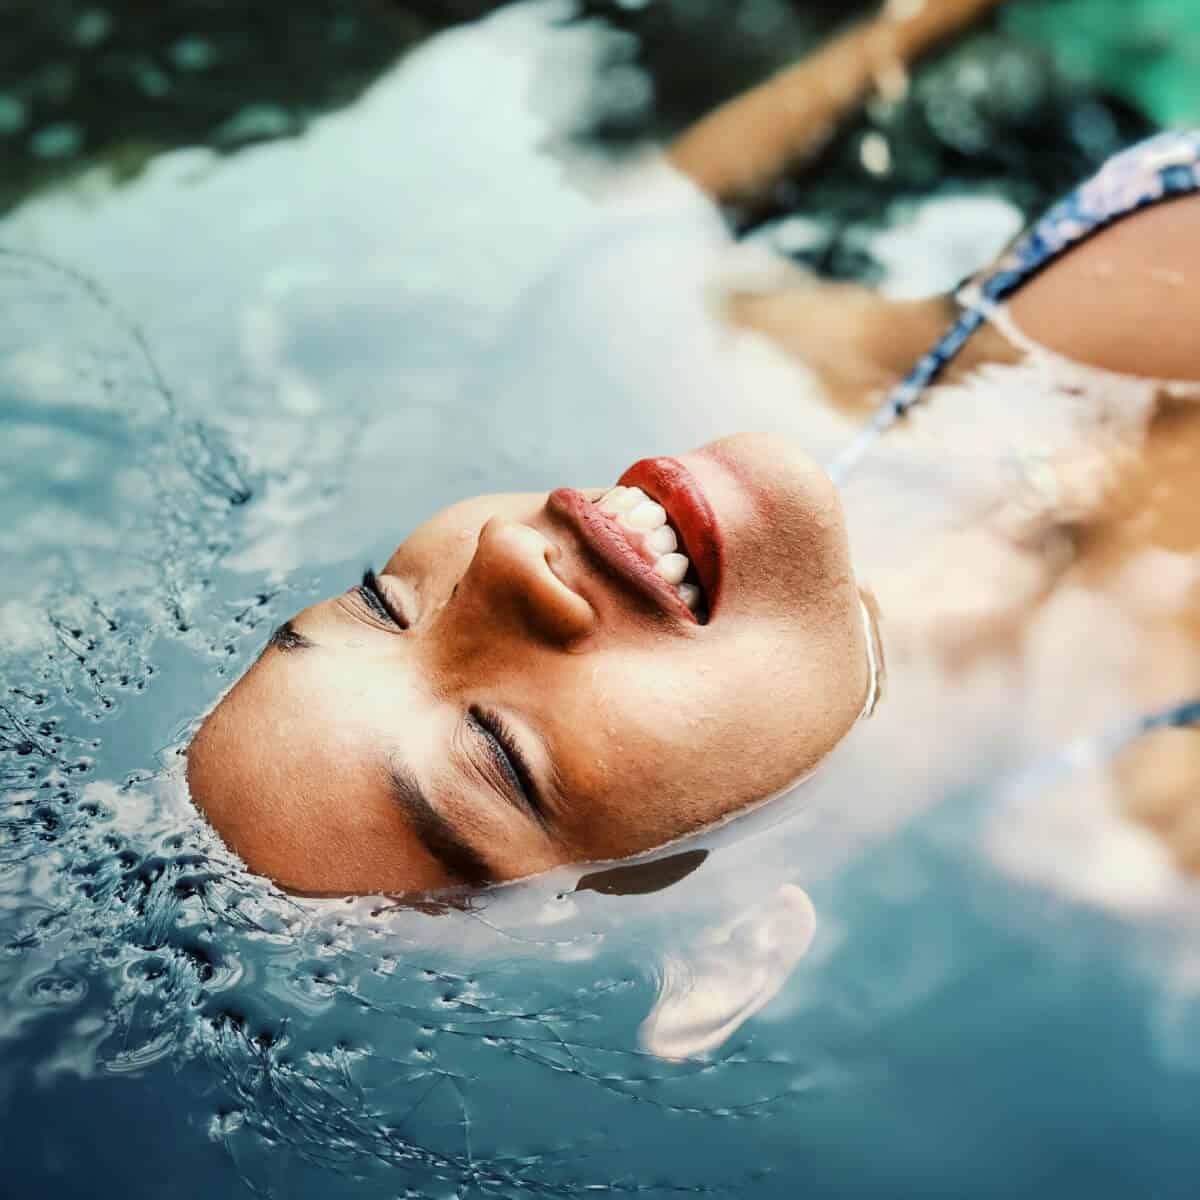 customer in a spa floating in water